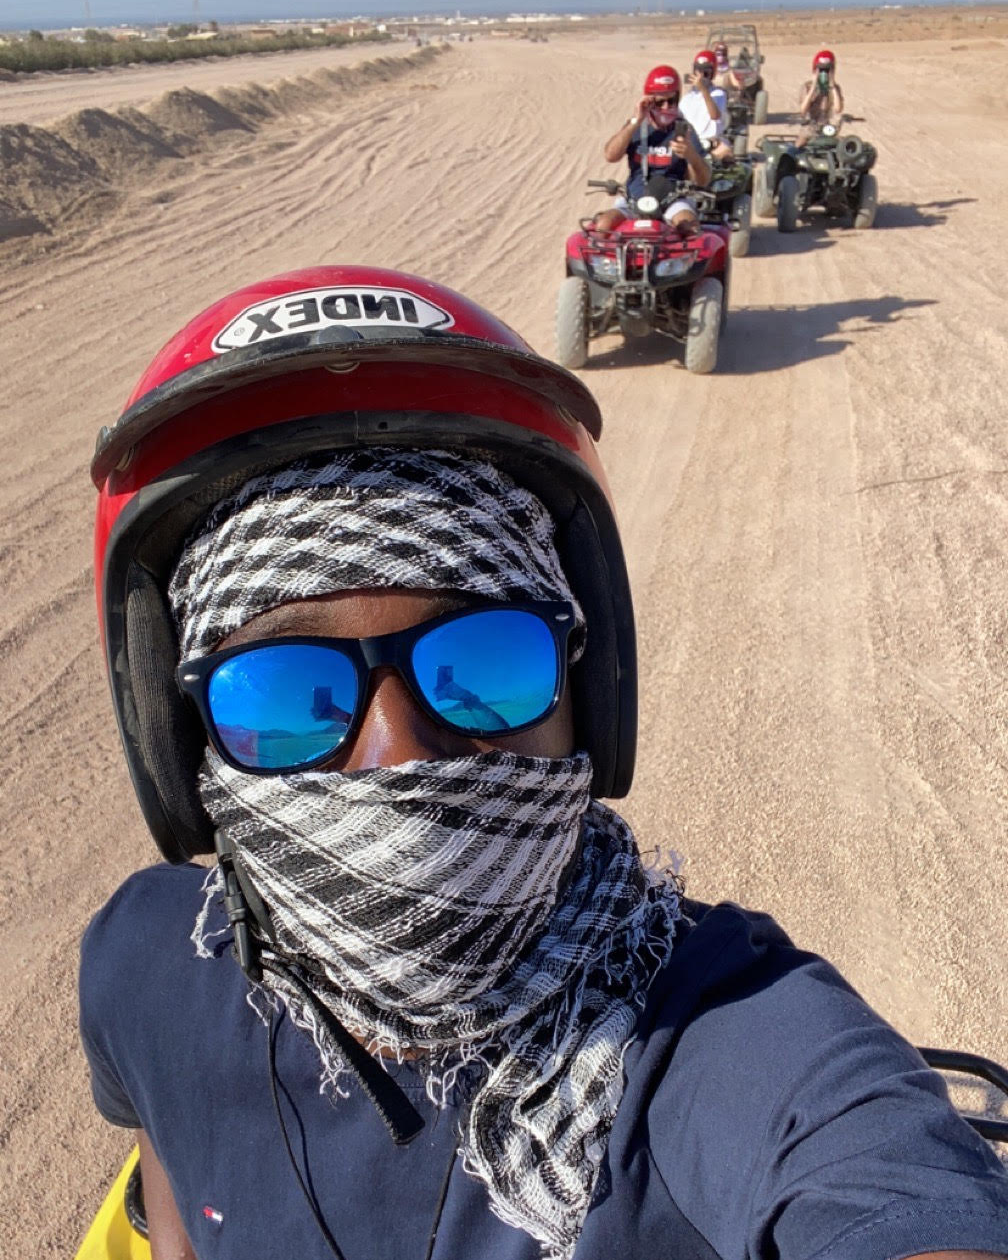  Ryan, riding a quad bike, wearing protective gear including a helmet and scarf with sunglasses navigates the terrain in Dubai Safari